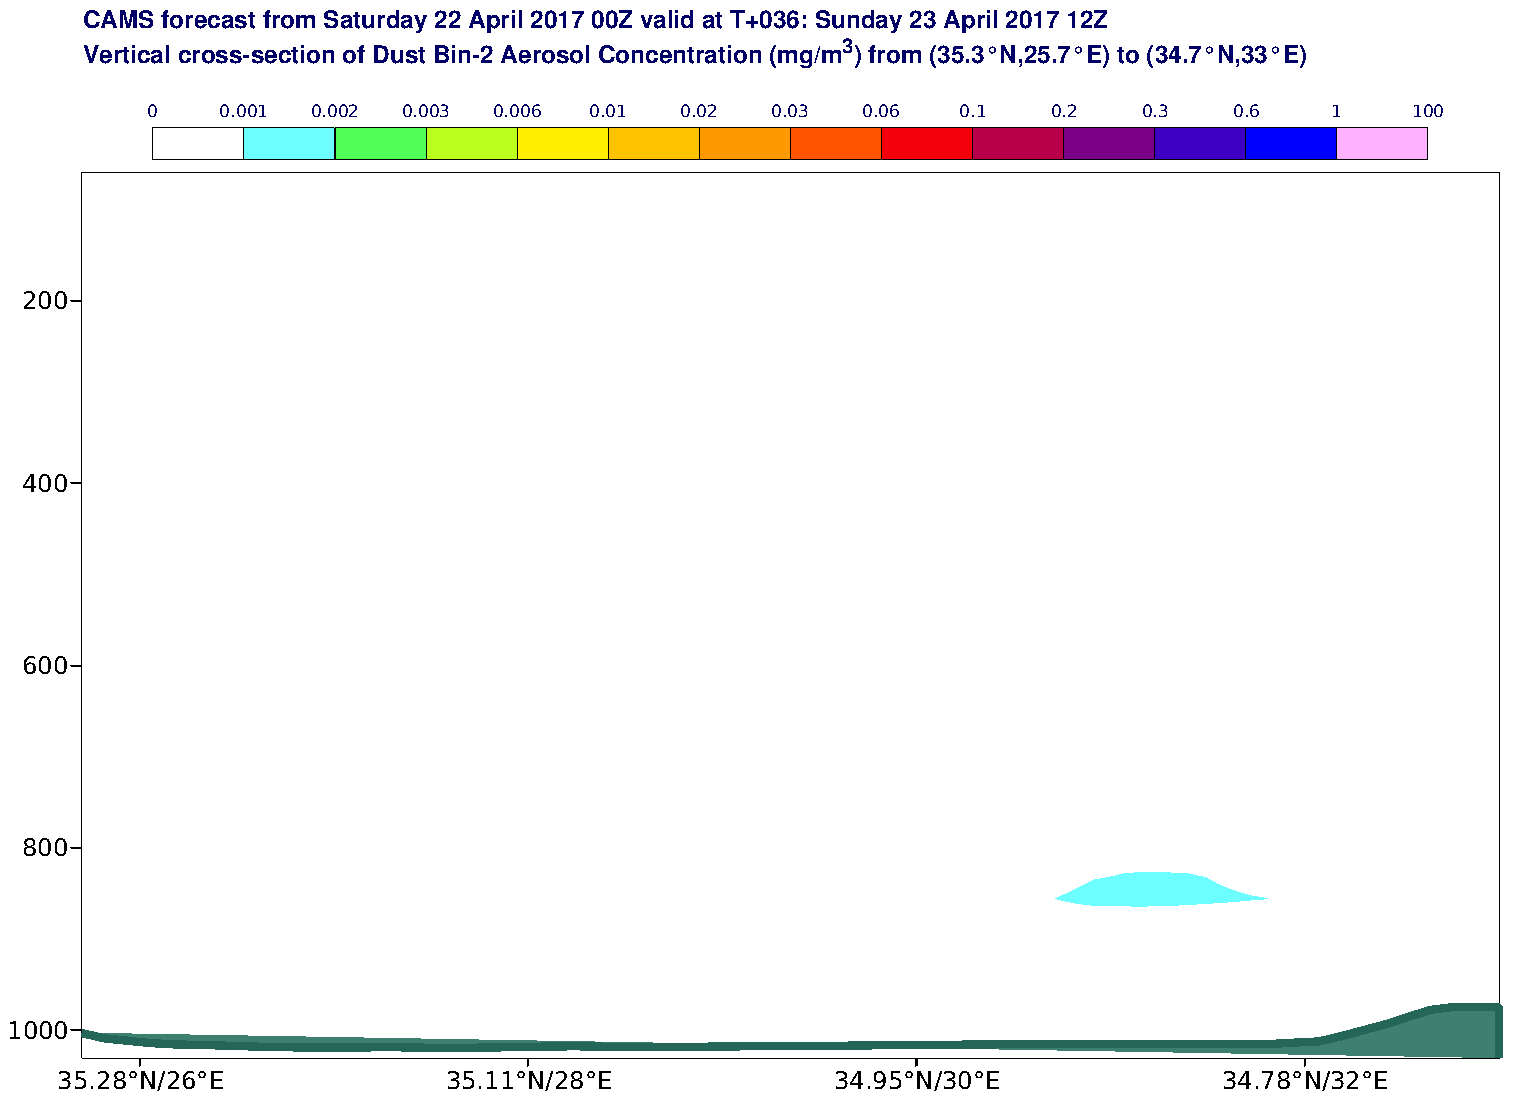 Vertical cross-section of Dust Bin-2 Aerosol Concentration (mg/m3) valid at T36 - 2017-04-23 12:00